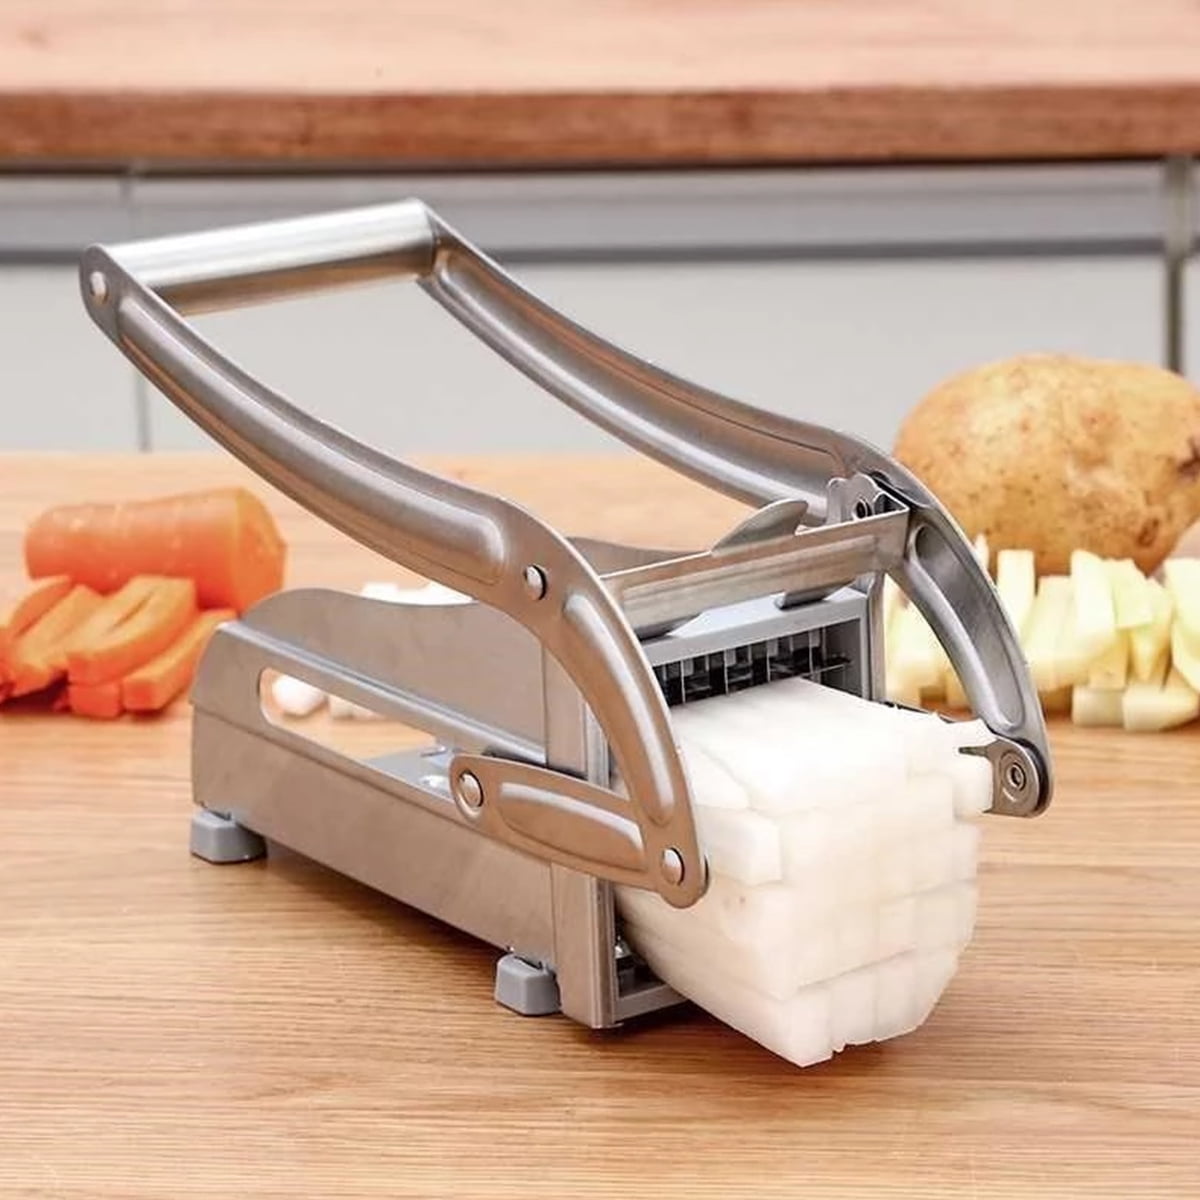 CANDIMILL Hand Press Potato Chipper Vegetable Fruit Slicer French Fry  Cutter With 3 Stainless Steel Blades